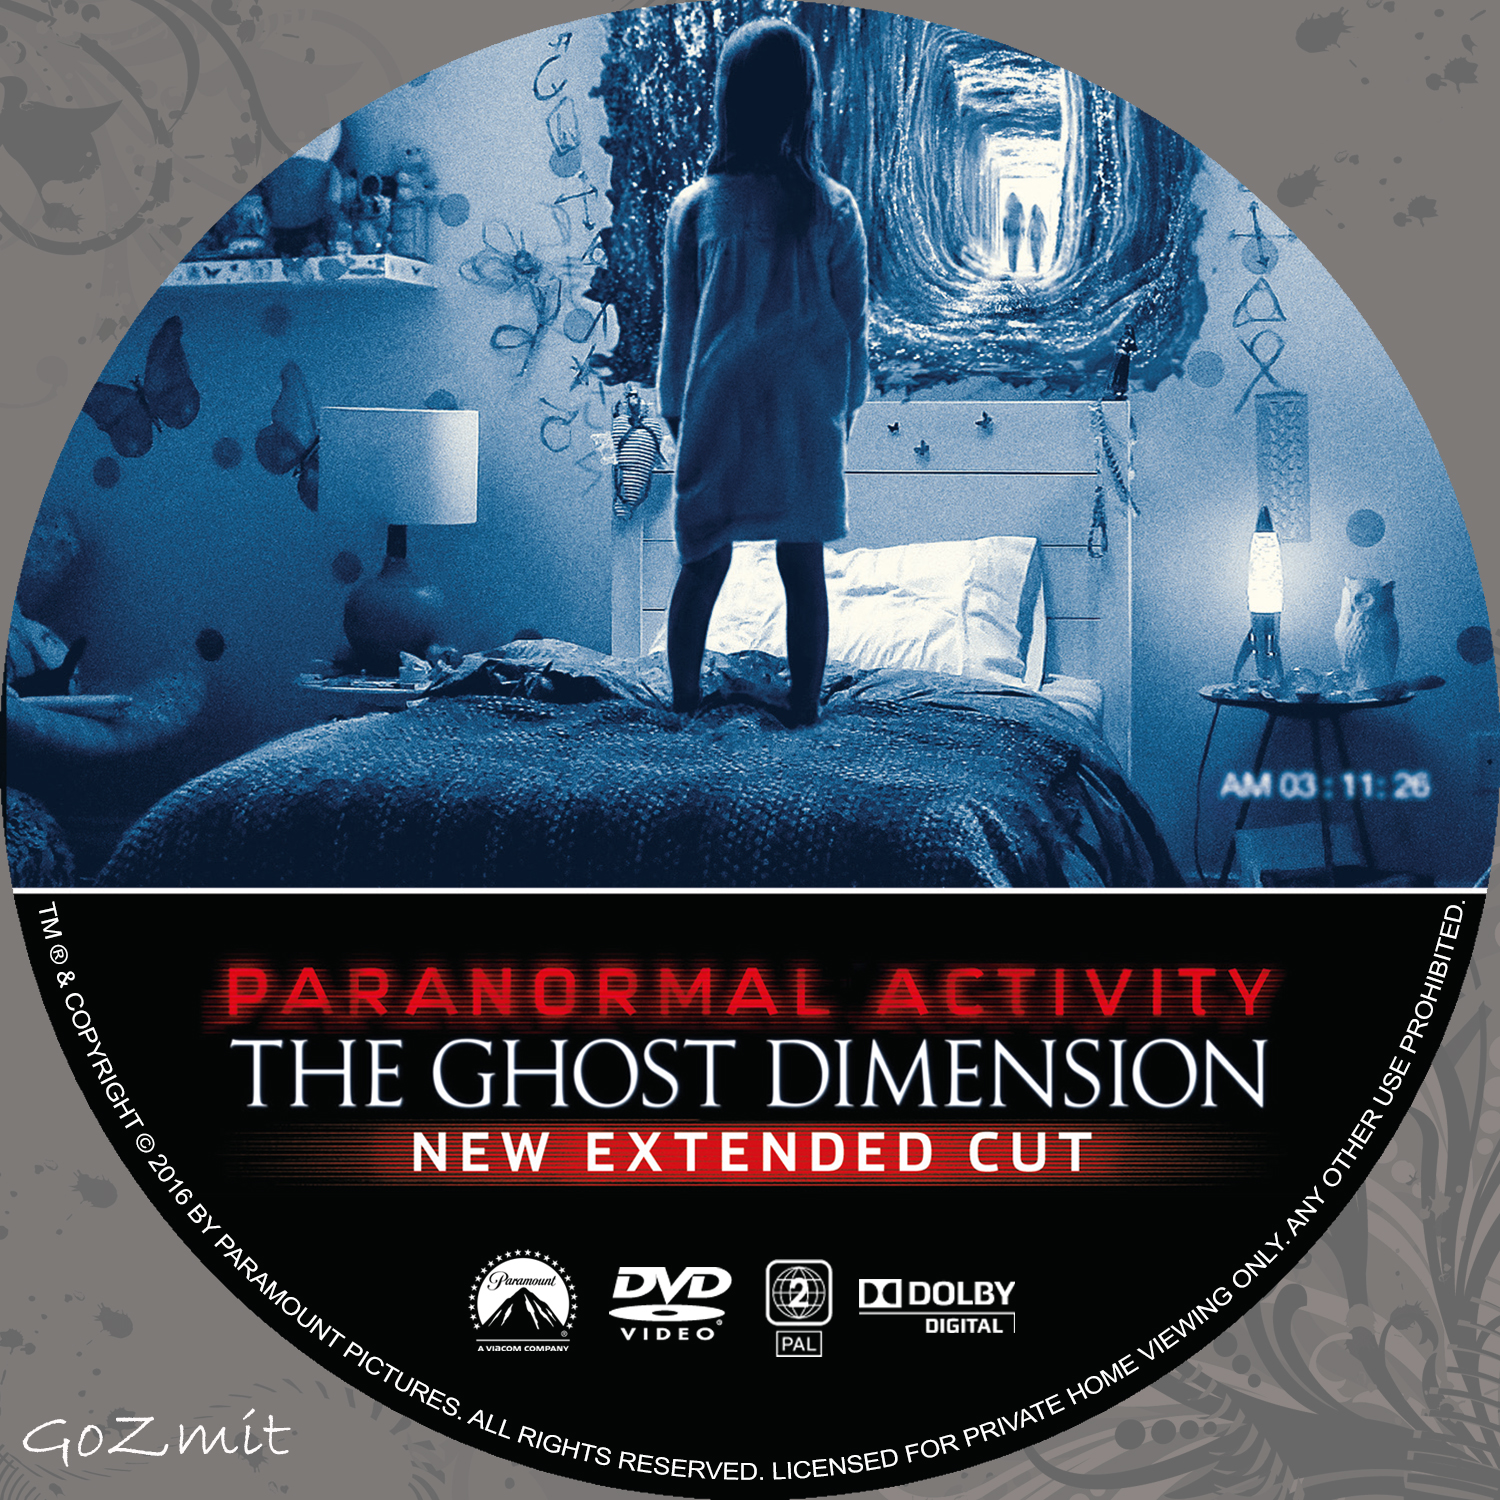 Covers Box Sk Paranormal Activity 5 The Ghost Dimension 2015 High Quality Dvd Blueray